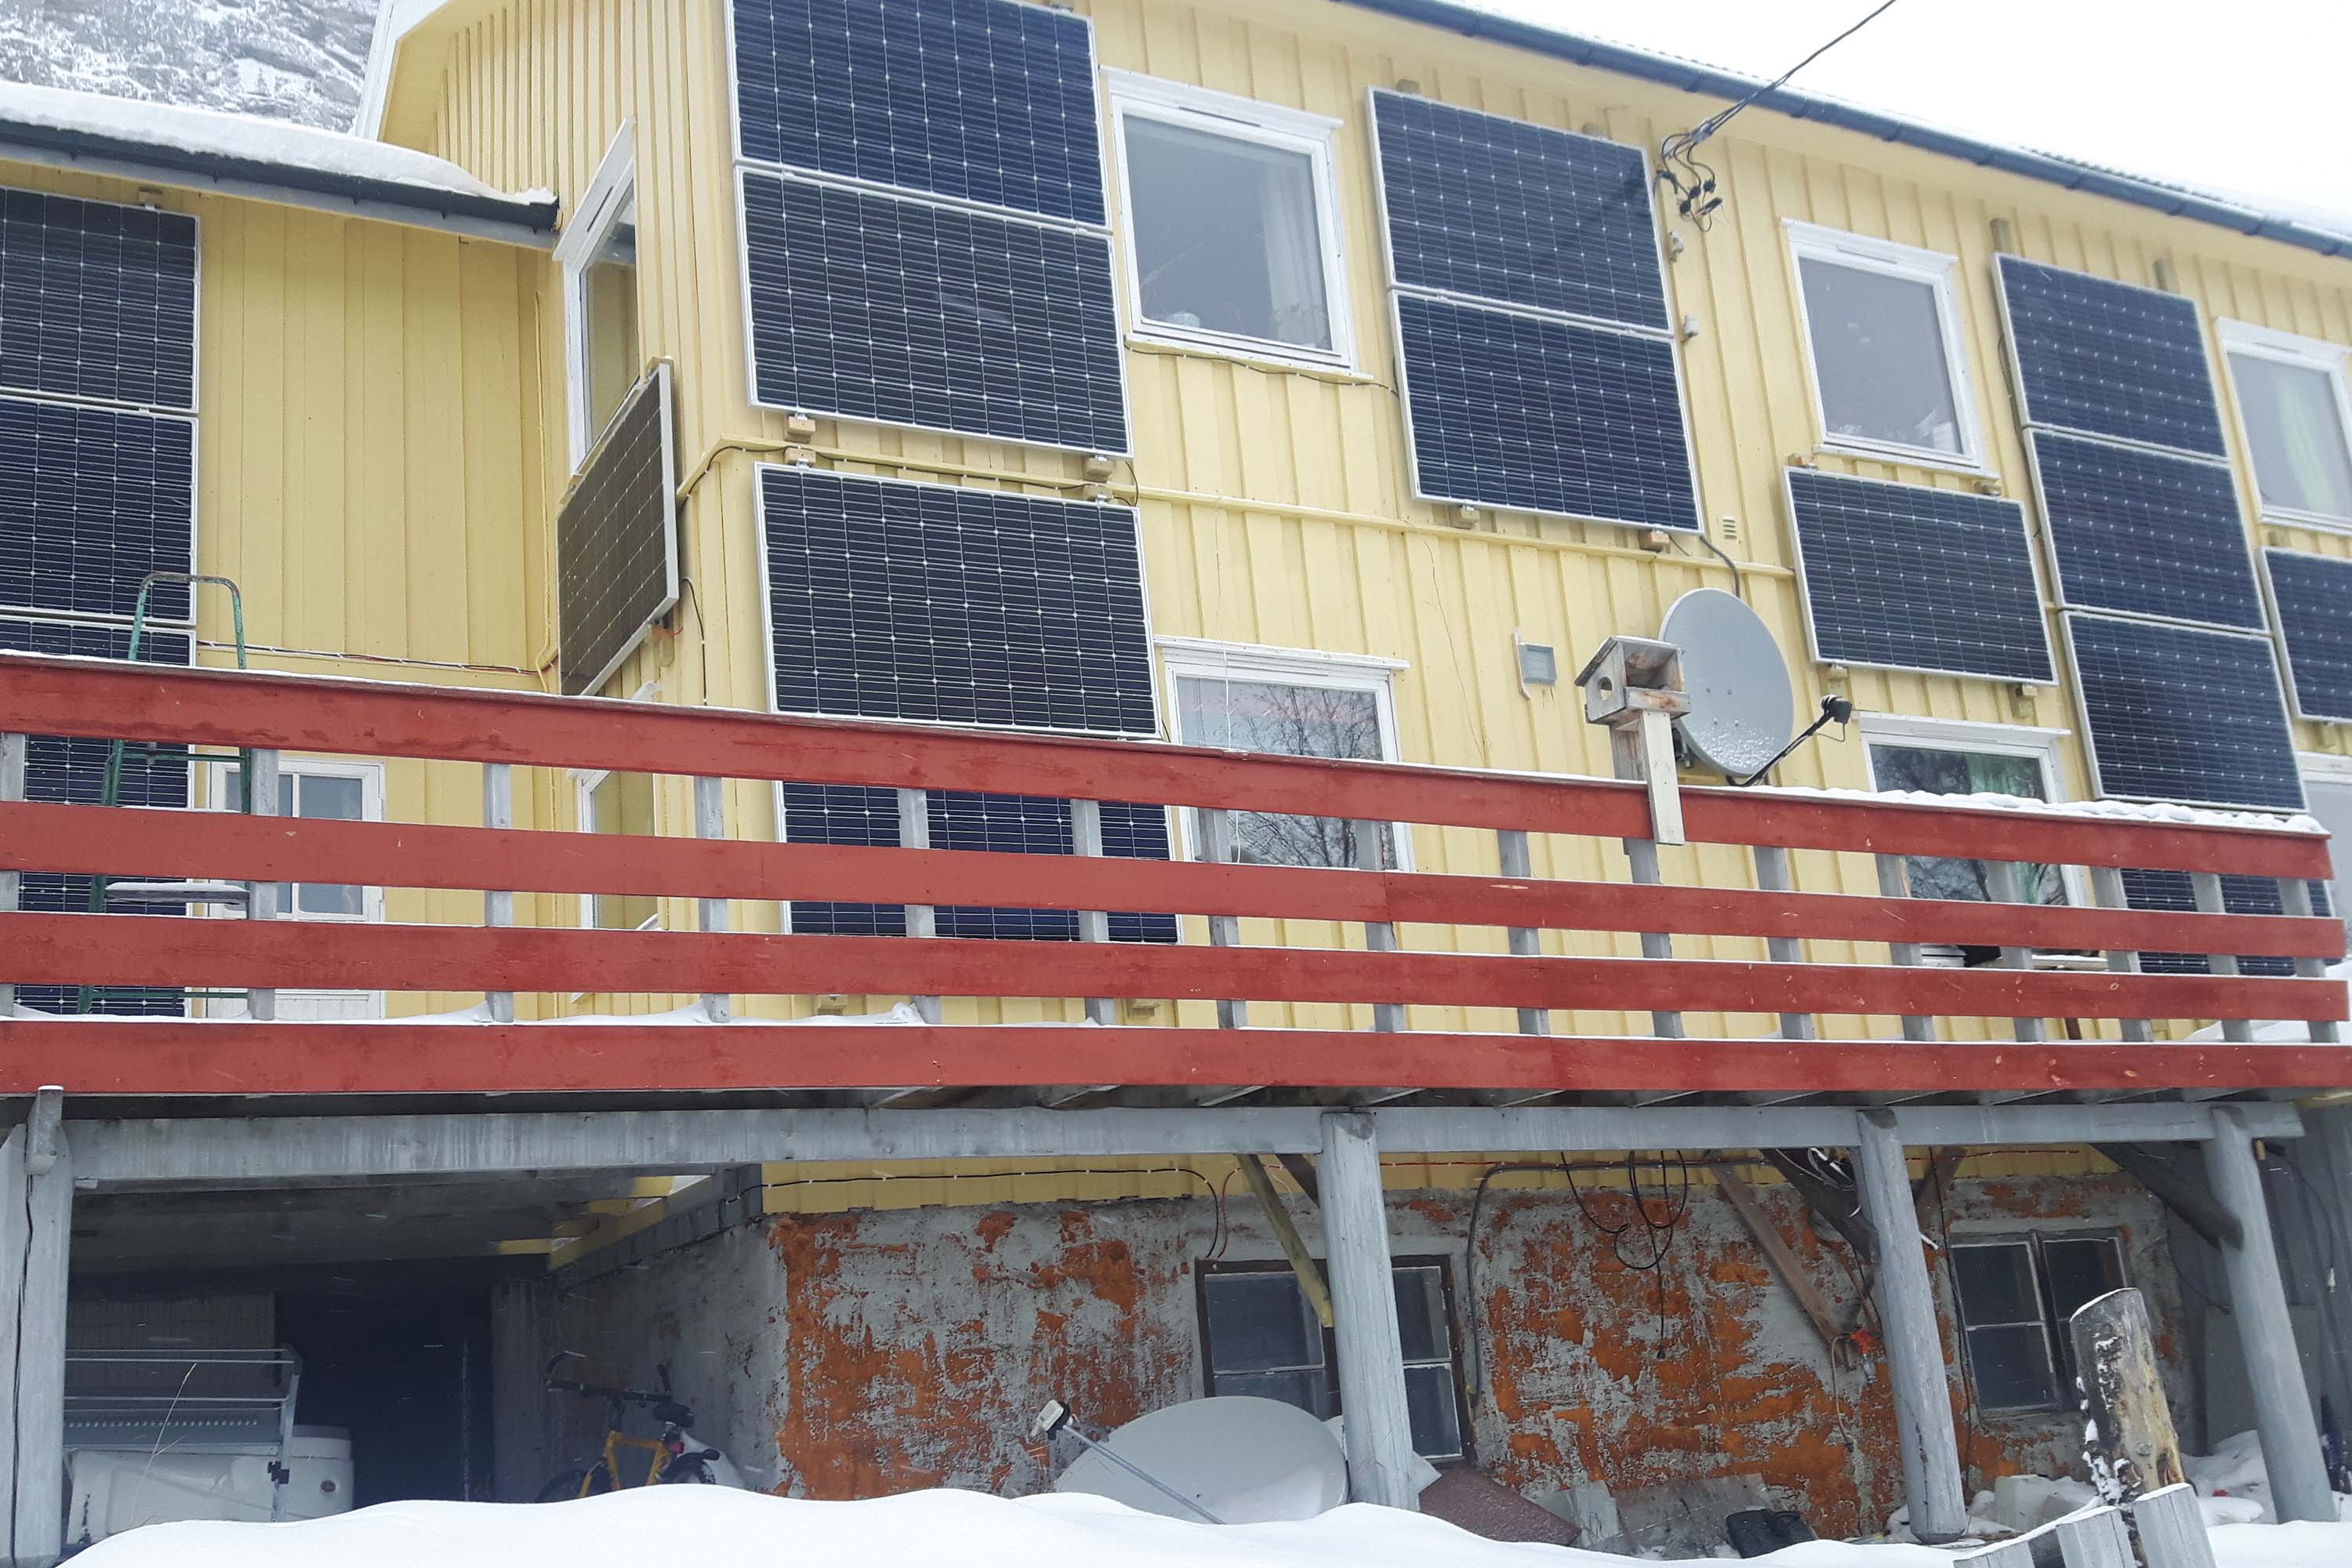 10KW solar on grid system project in Norway